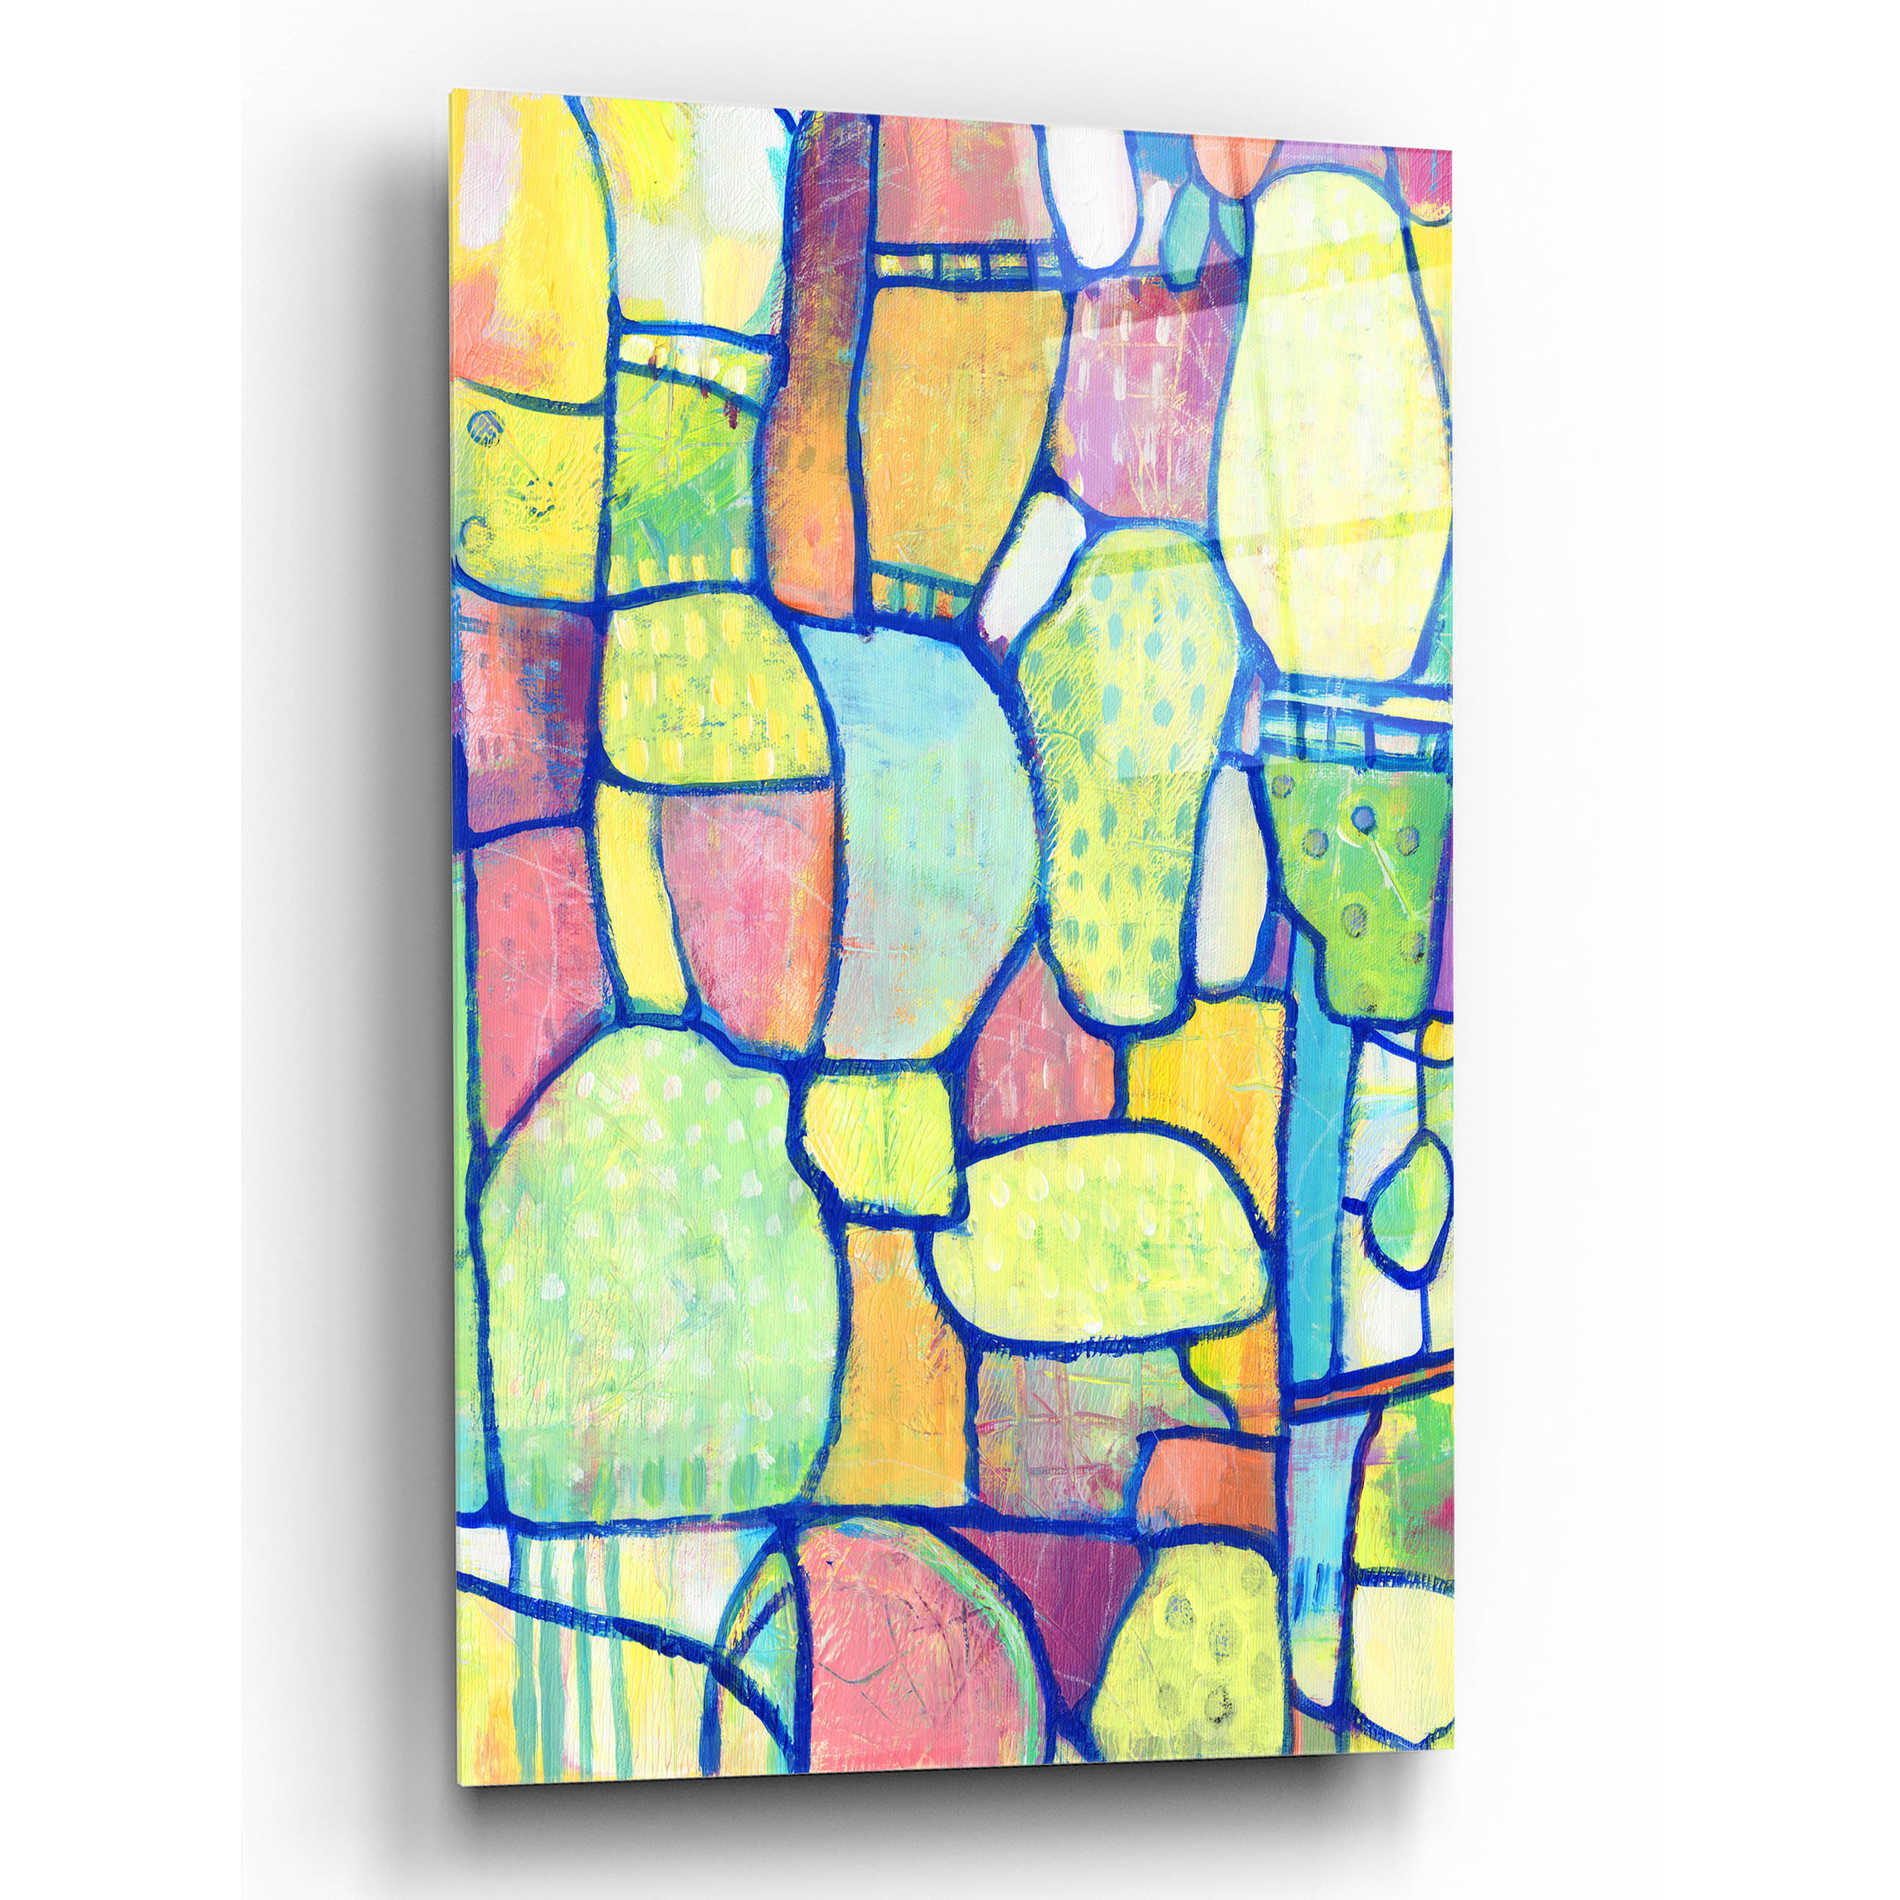 Epic Art 'Stained Glass Composition II' by Tim O'Toole, Acrylic Glass Wall Art,12x16